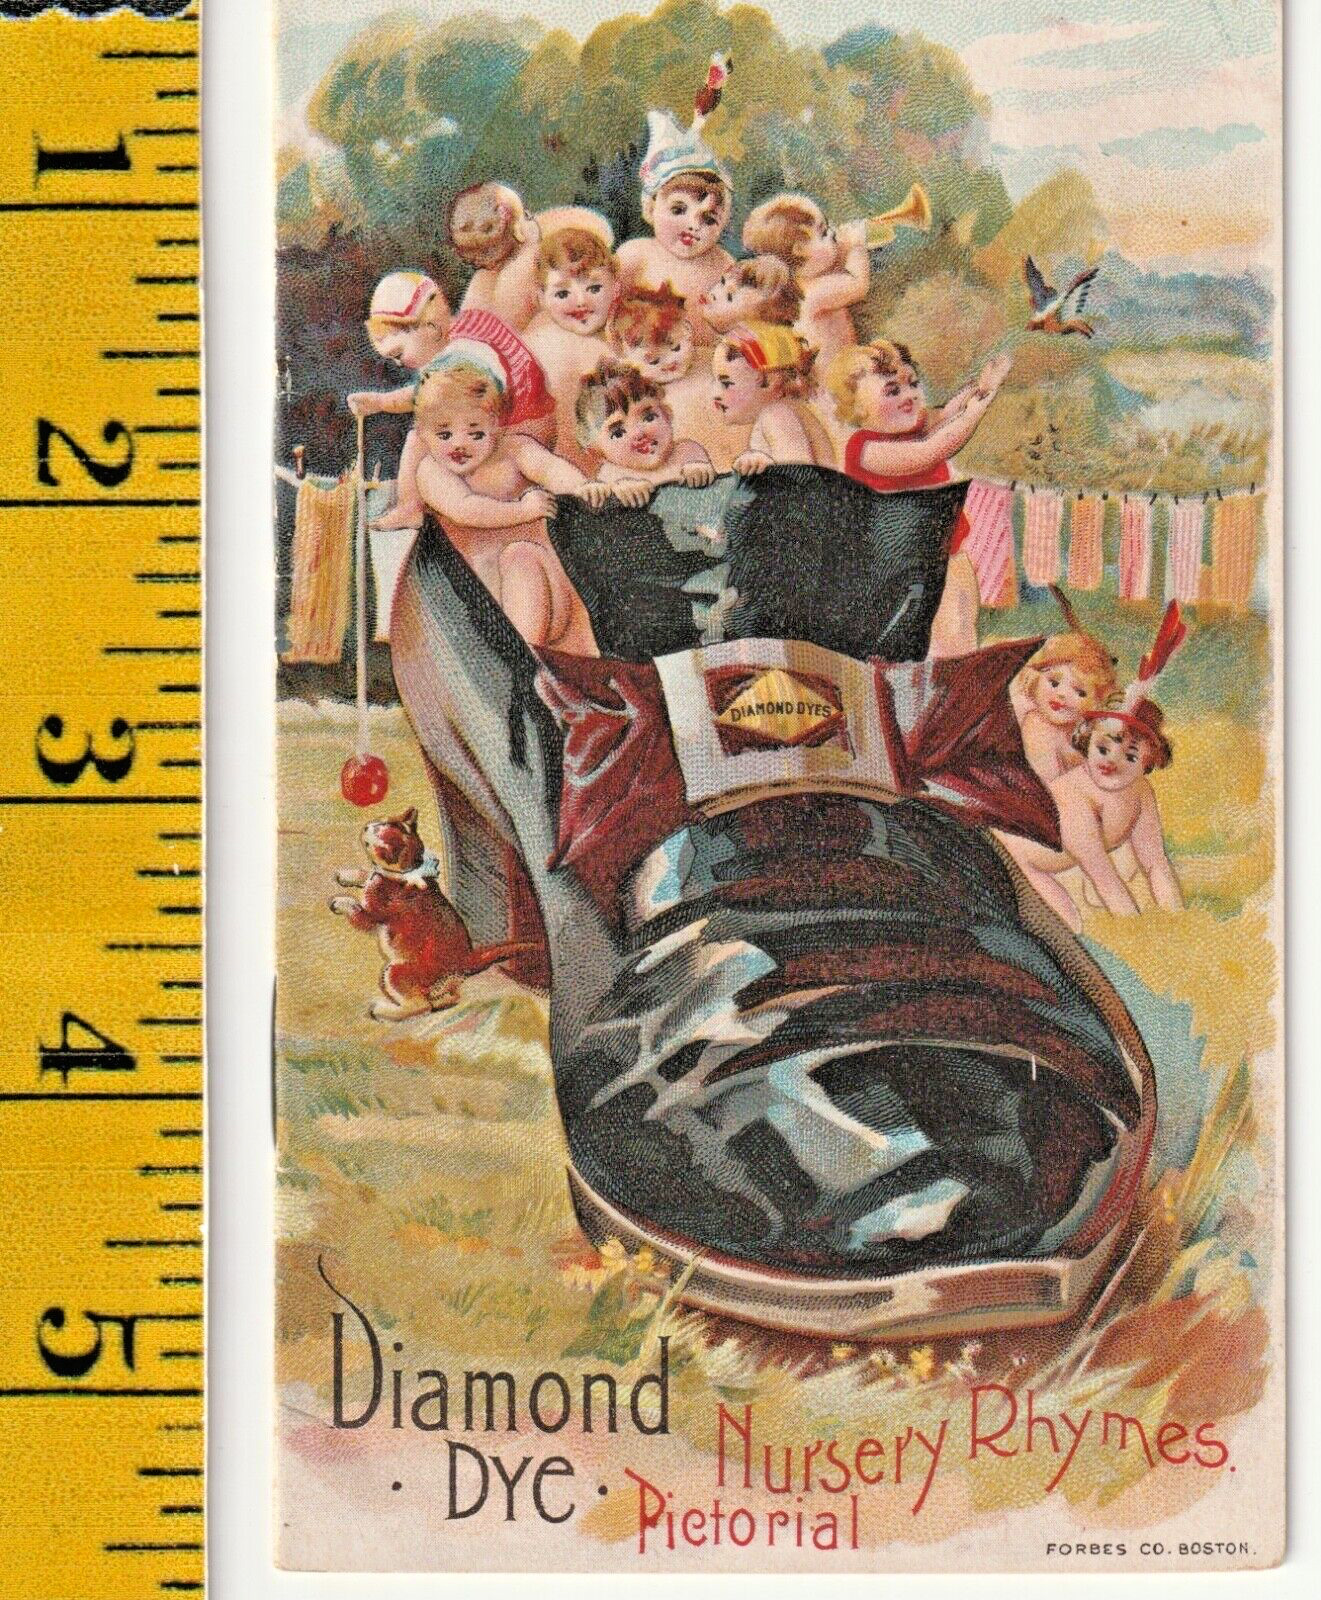 1890s DIAMOND DYE Advertising Nursery Rhymes Pictorial Color Lithographed, Witch